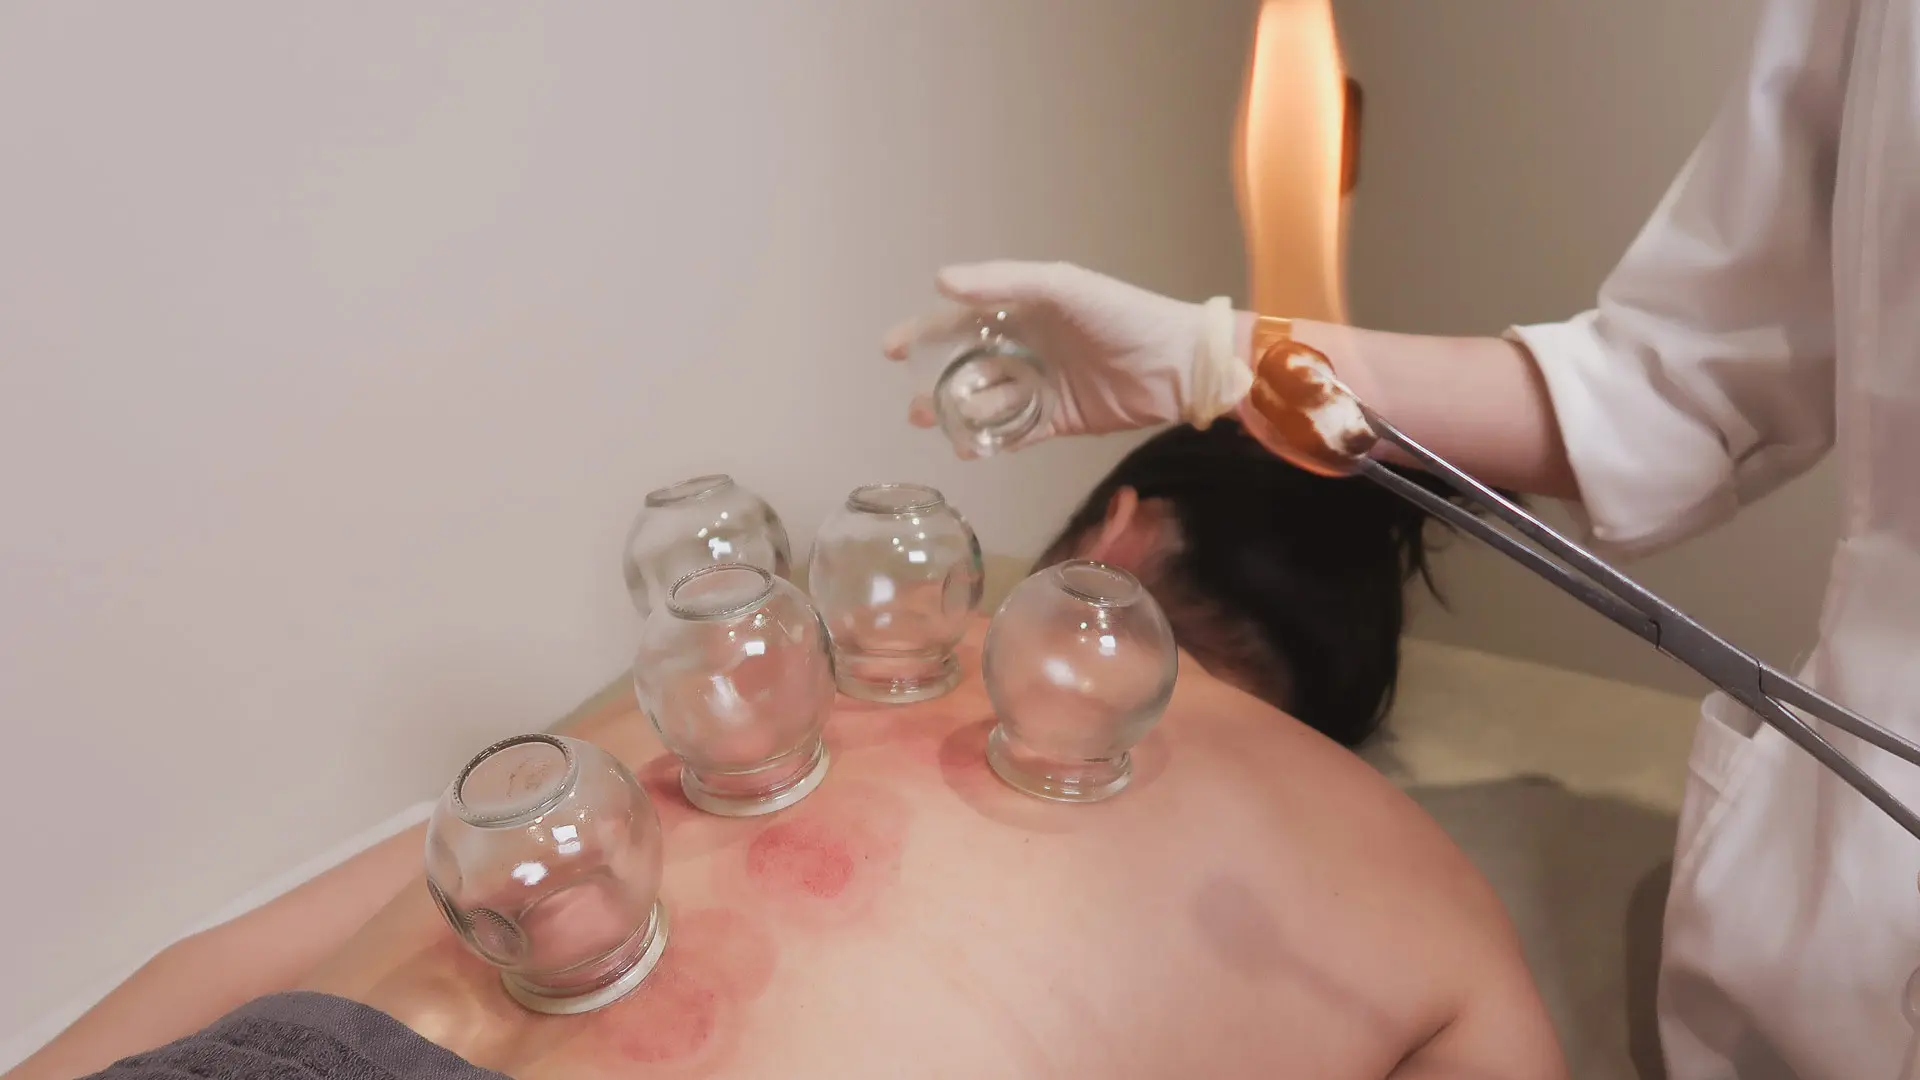 Cupping with live fire